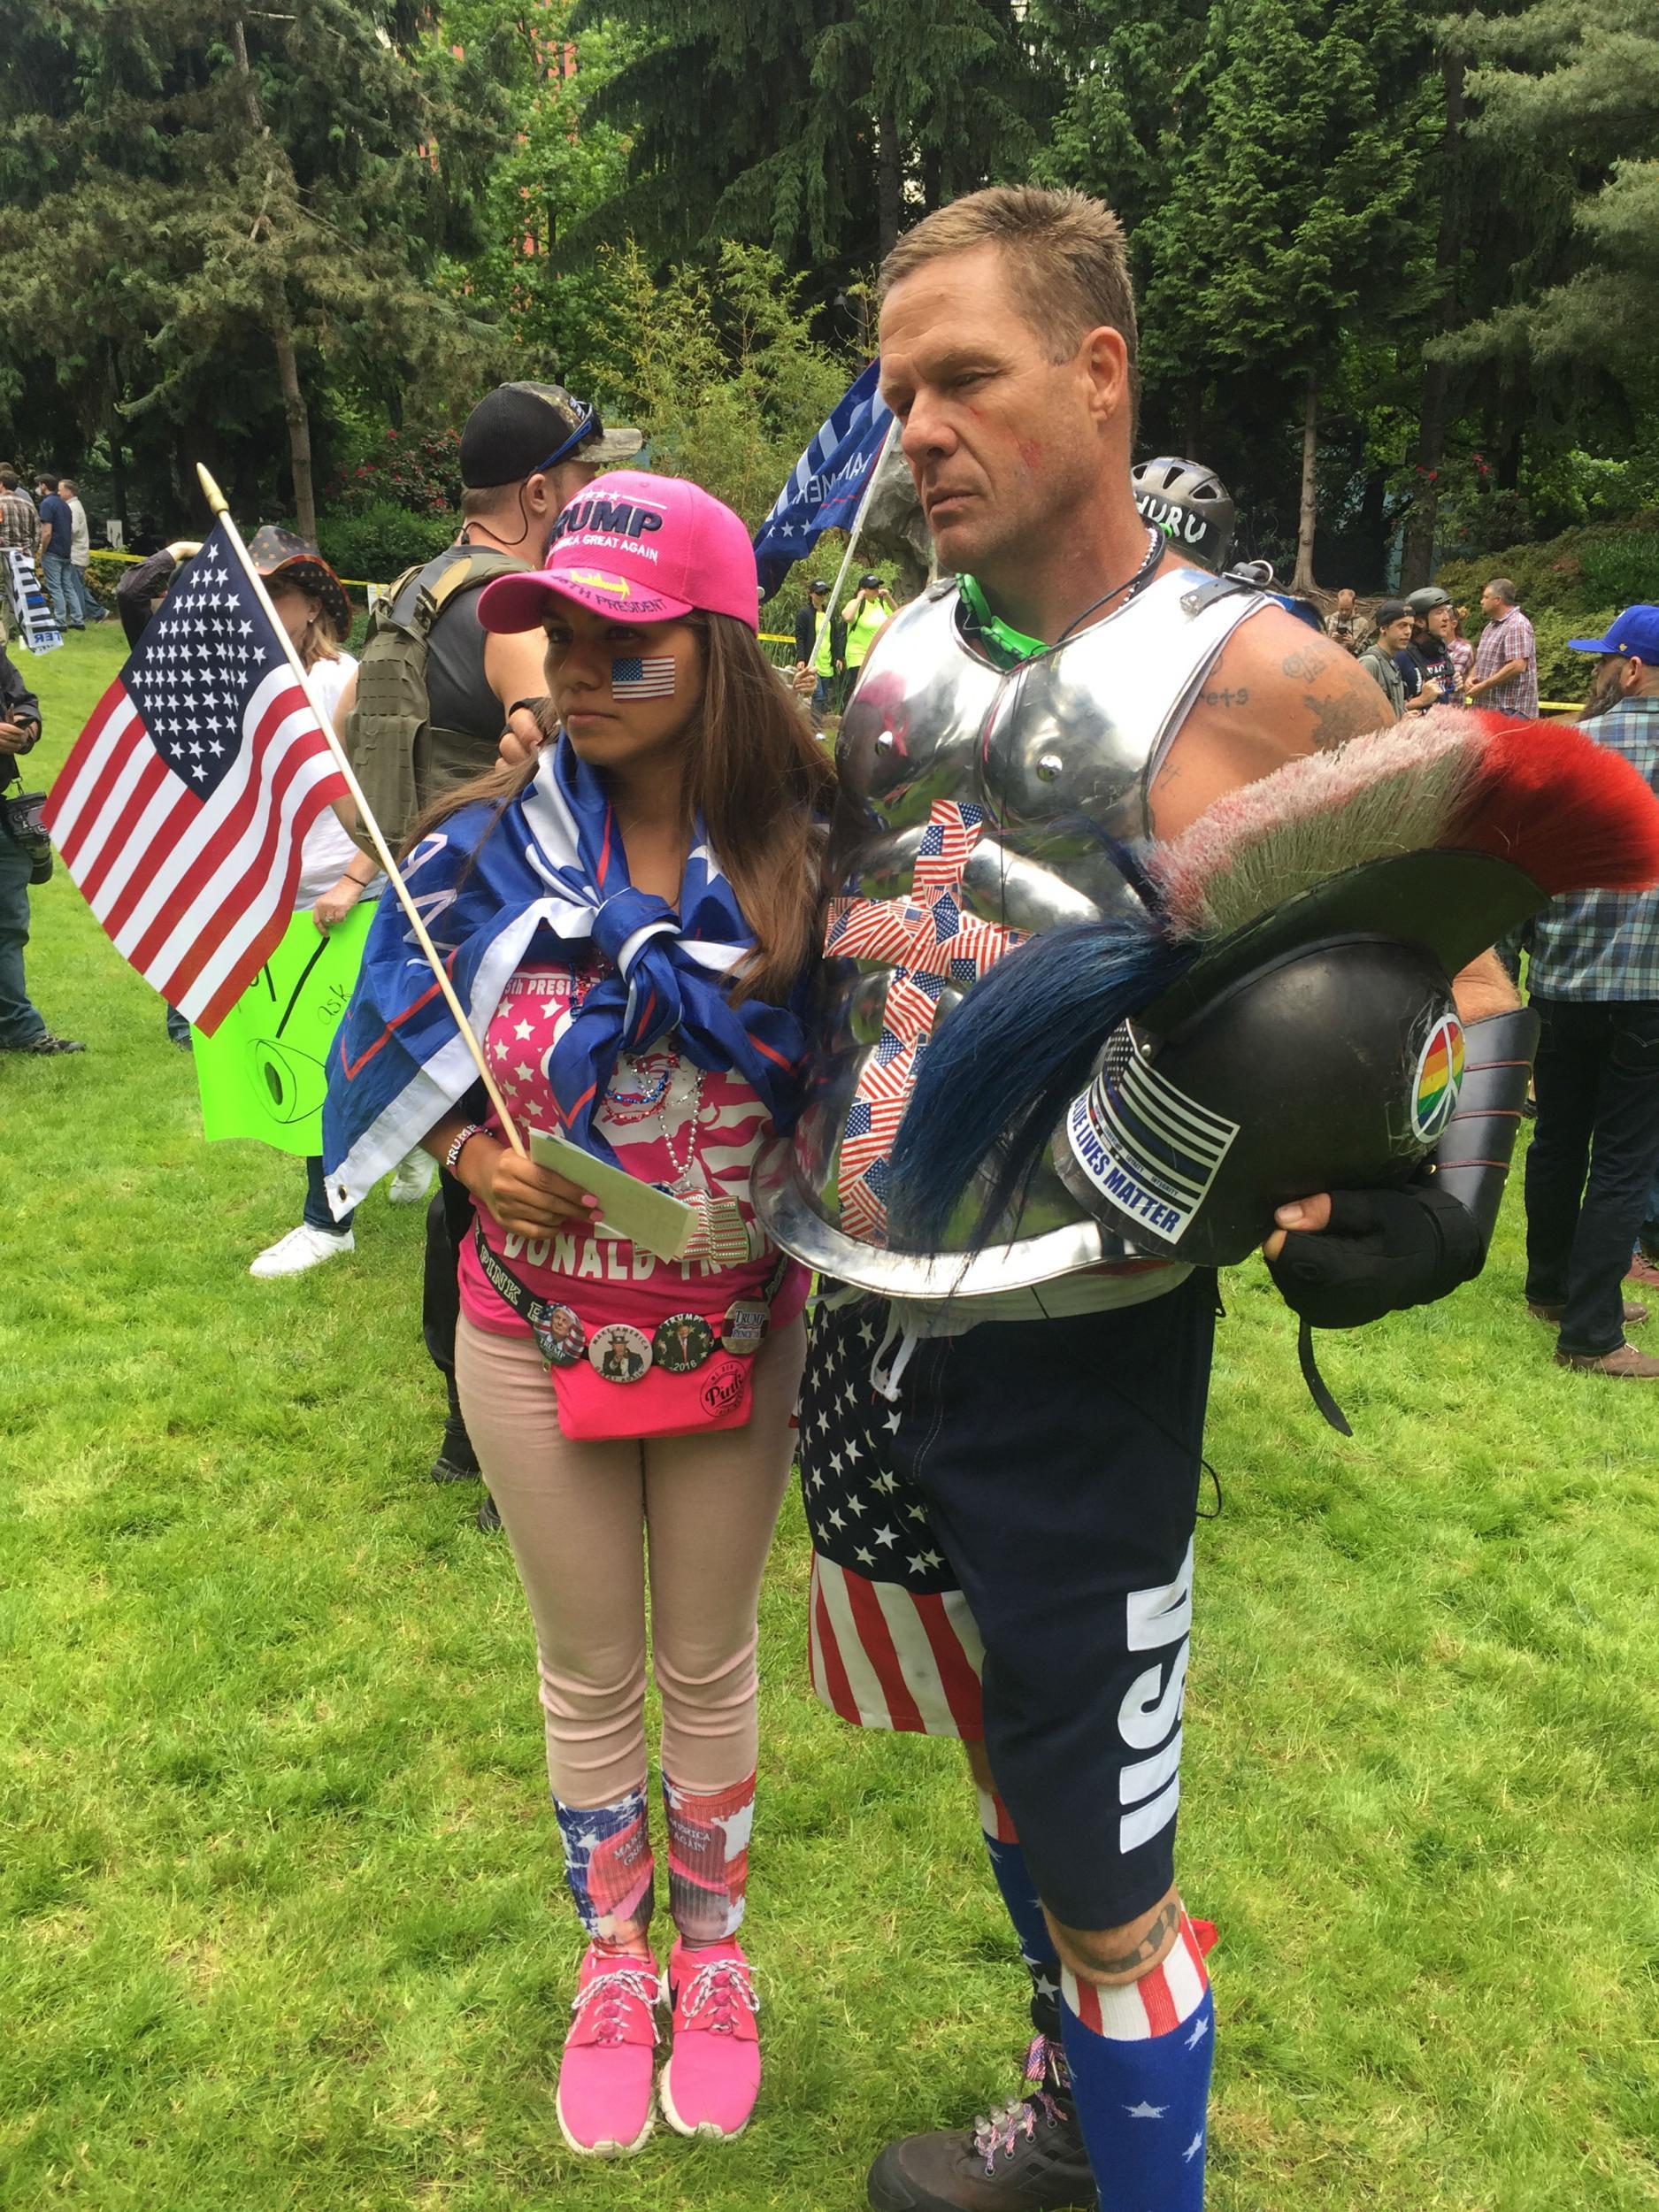 John Turano and his daughter Bianca had travelled from California to attend the alt-right rally